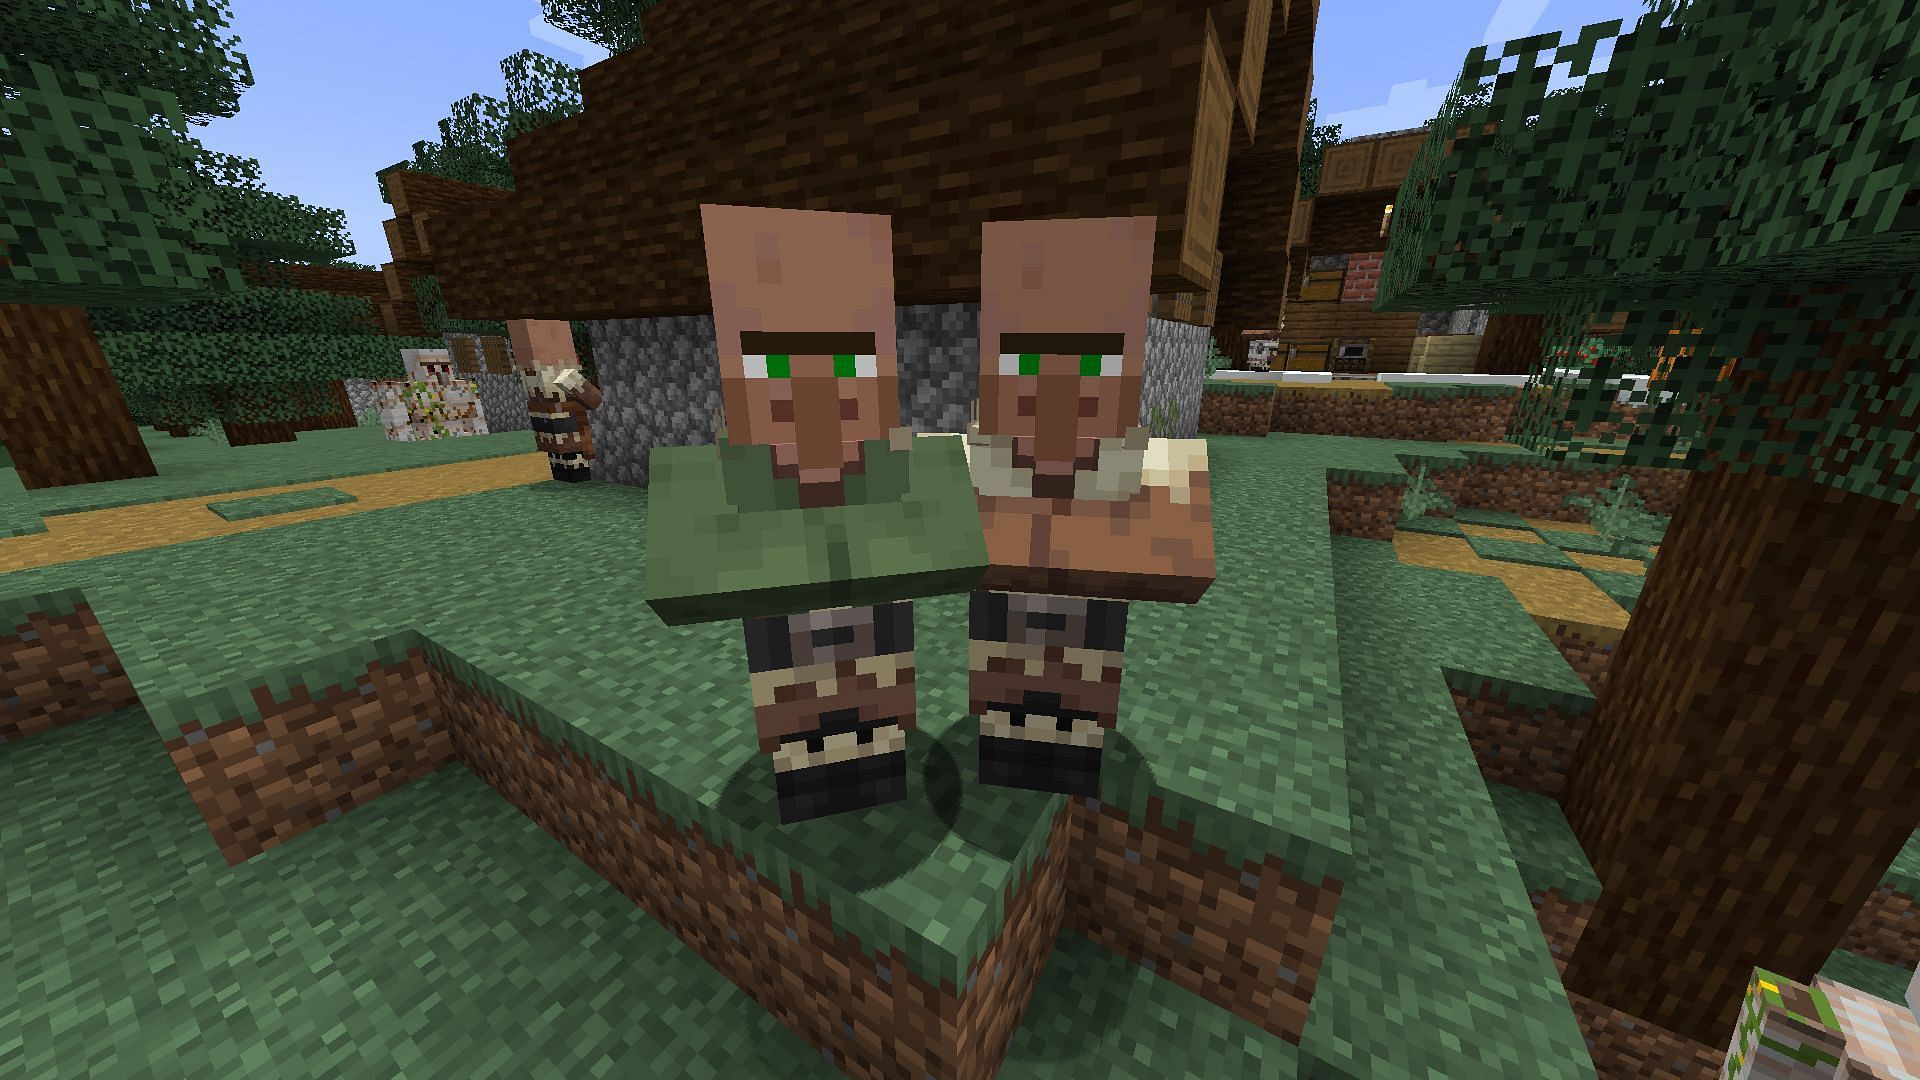 Villagers can trade several useful items in Minecraft (Image via Mojang)